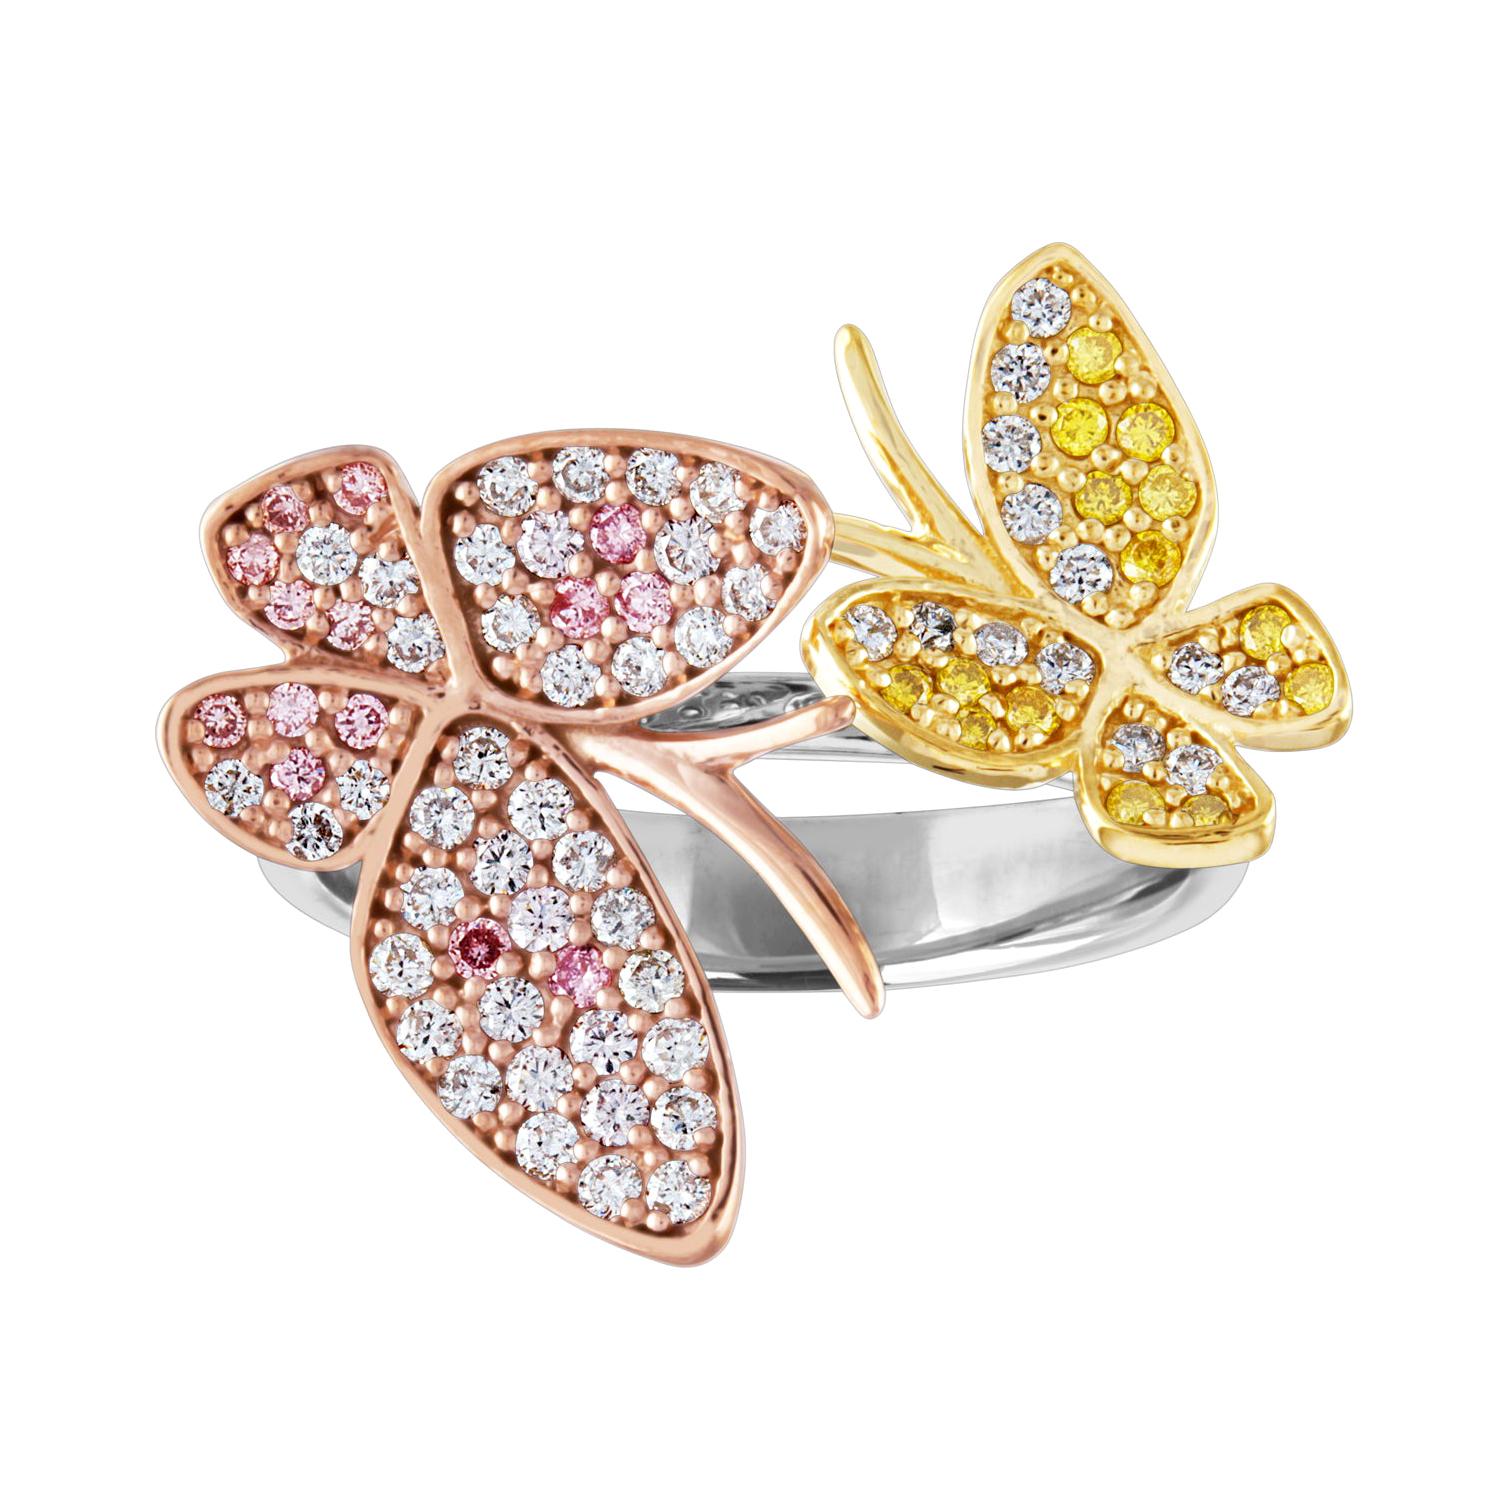 0.55 Carats Tri-Color Diamonds & Tri-Color Gold Bypass Butterfly Ring